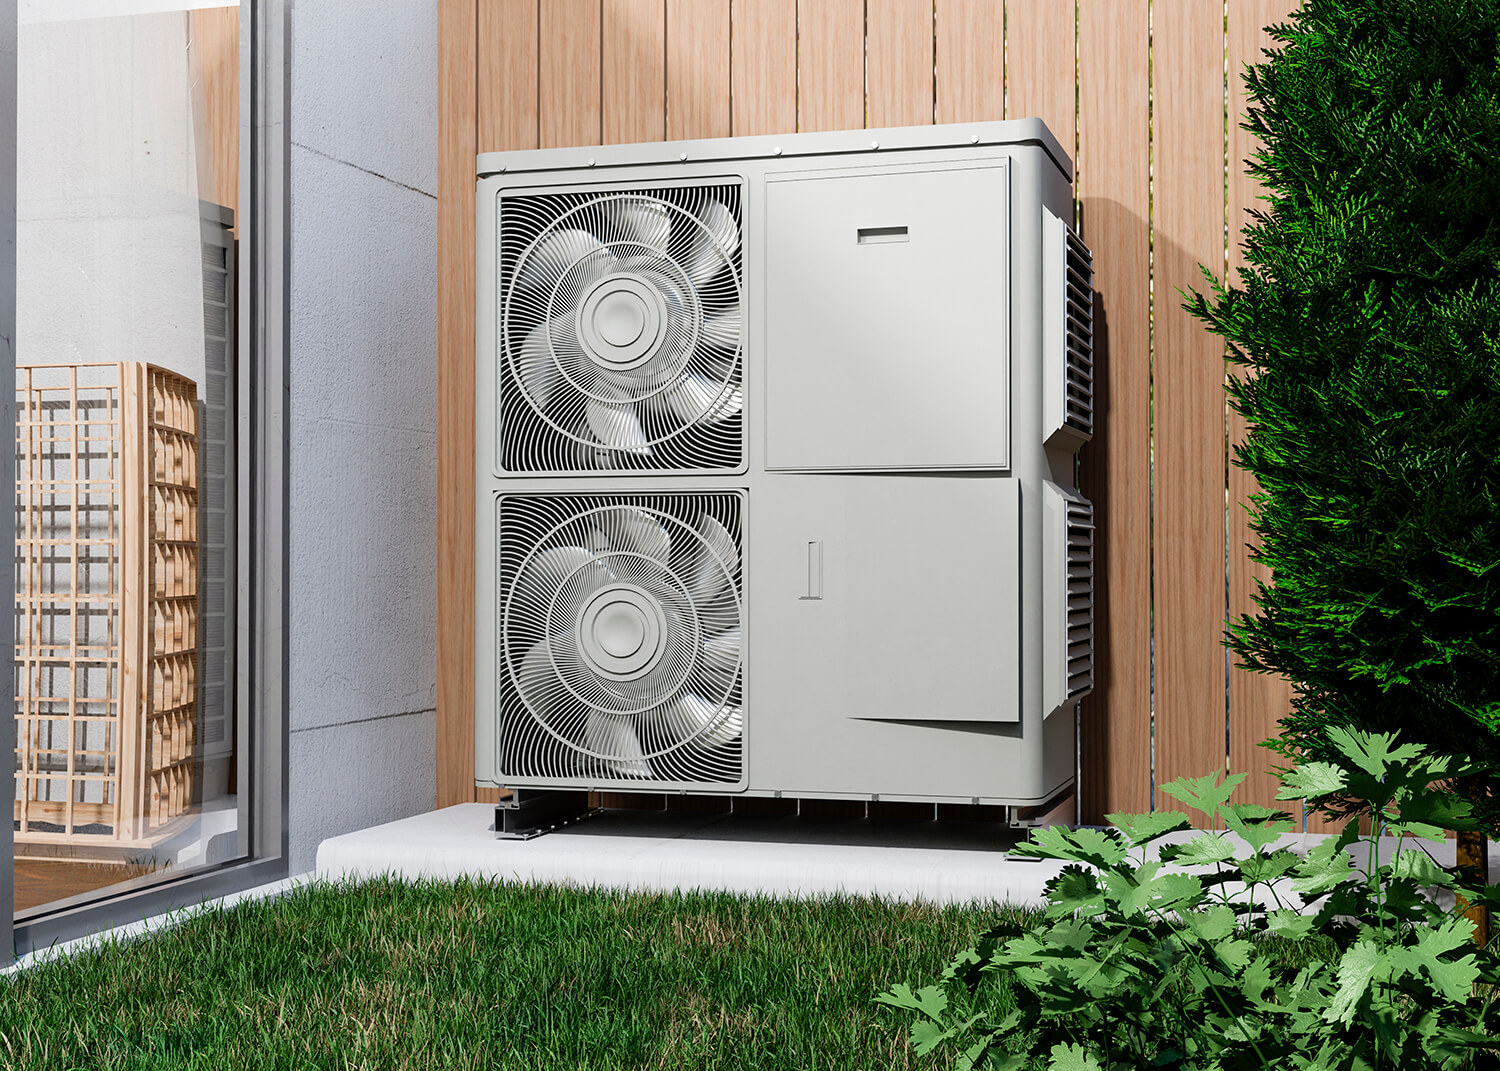 A glimpse in the future of Heating, Ventilation, as well as A/C technology